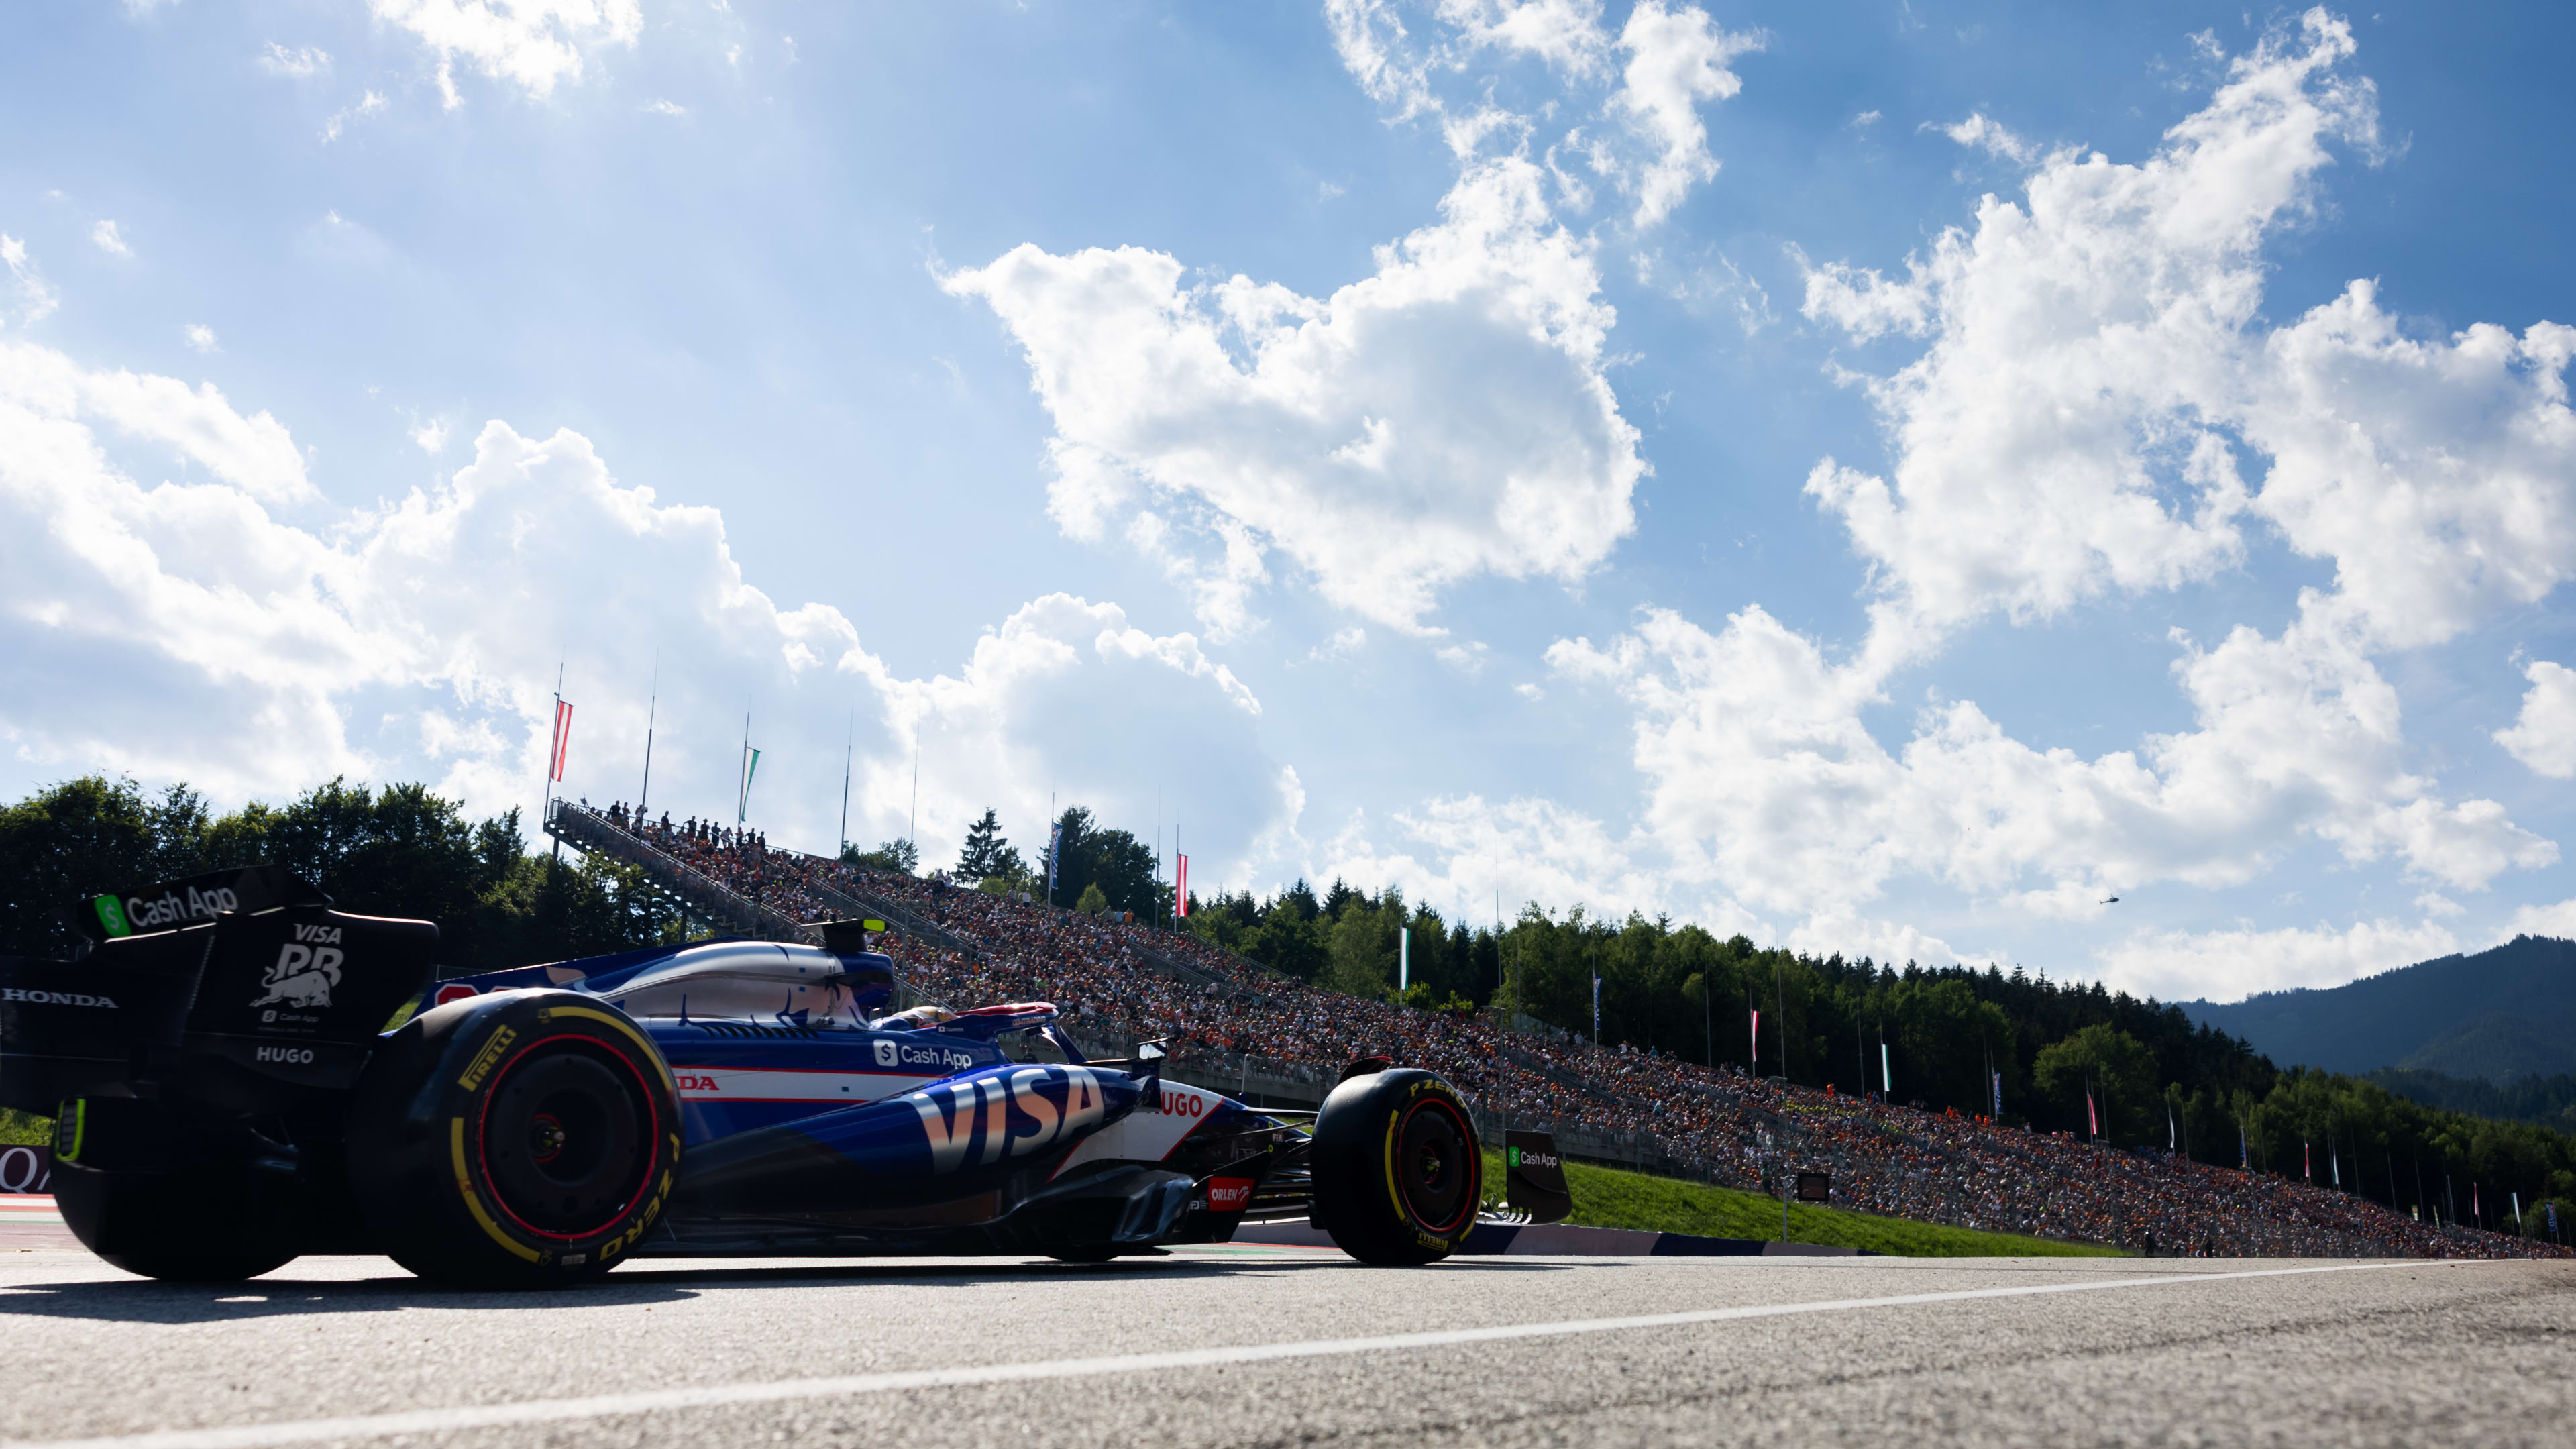 LIVE COVERAGE: Follow all the action from the F1 Sprint in Austria